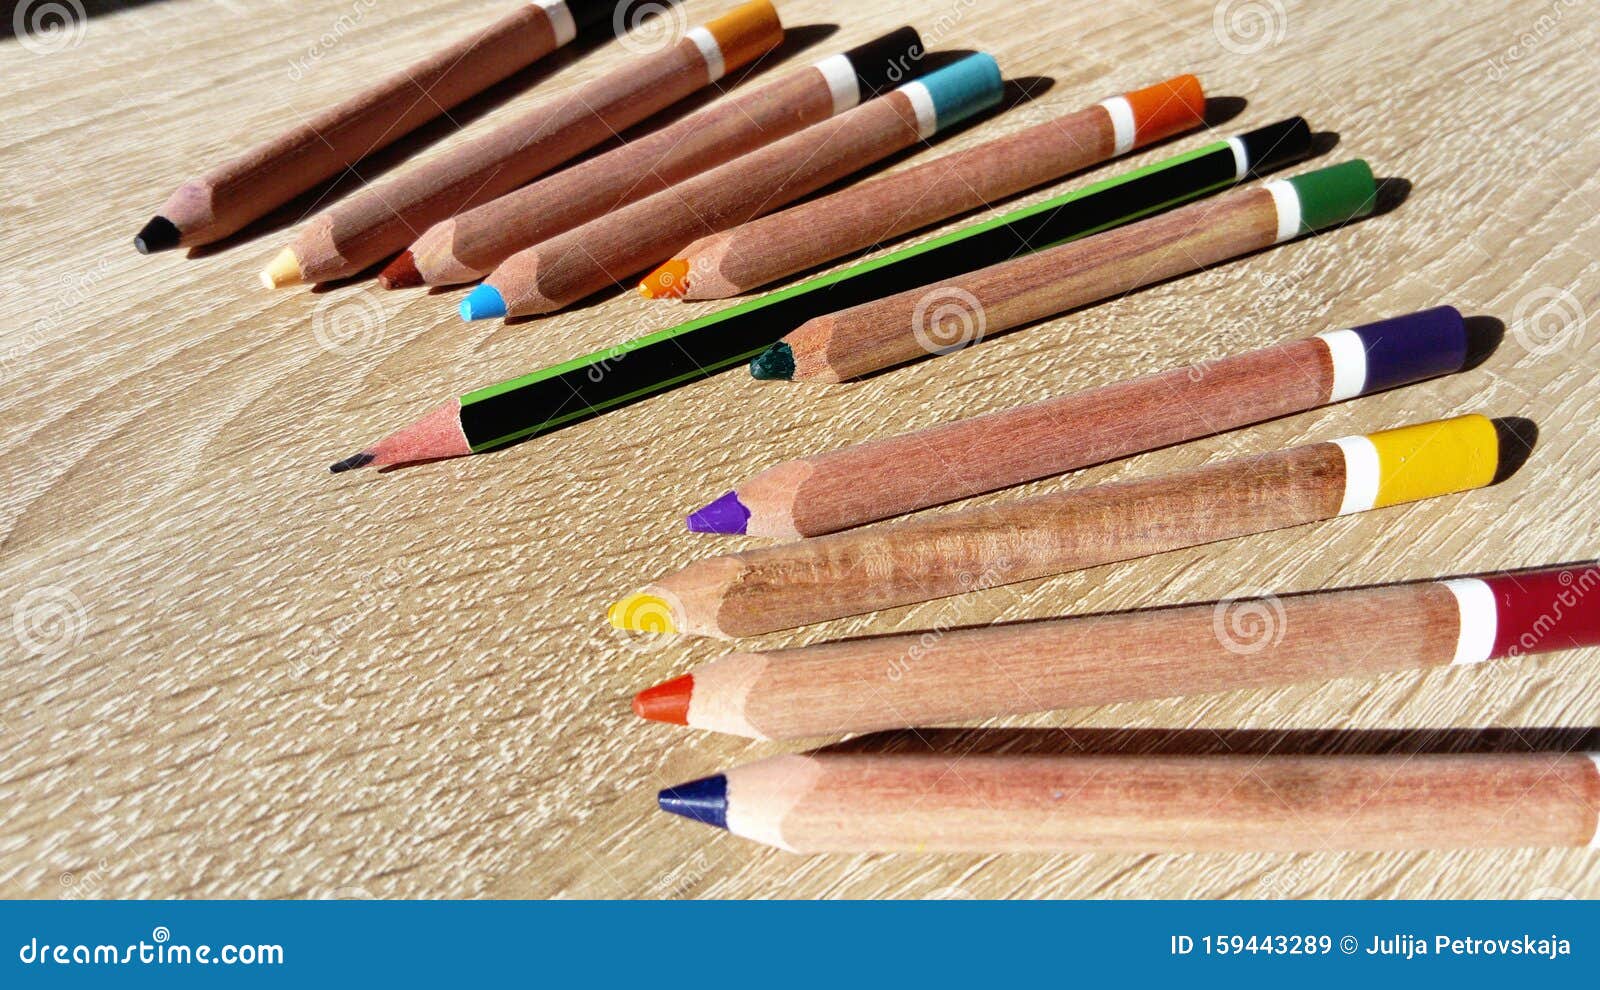 wooden pencils of different colors lie on a beige table. among them stands out one longer graphite pencil. dissimilarity,